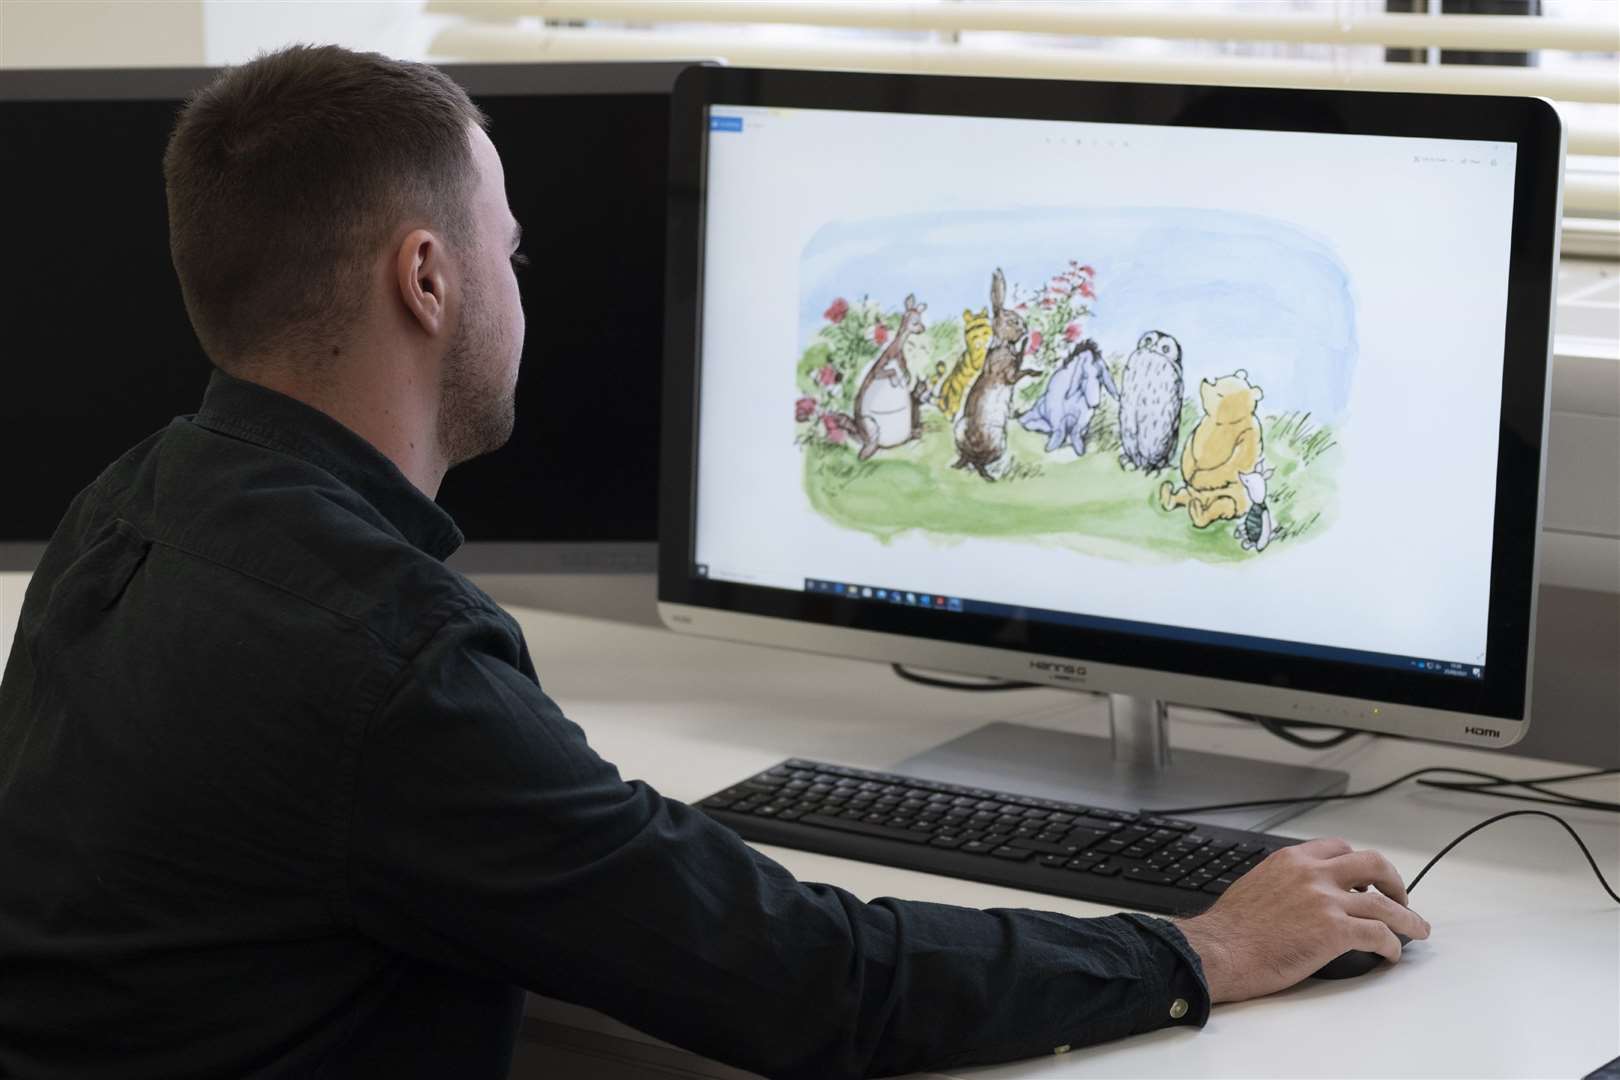 The Royal Mint has recently been working on the release of the Winnie the Pooh 50p collectable coins